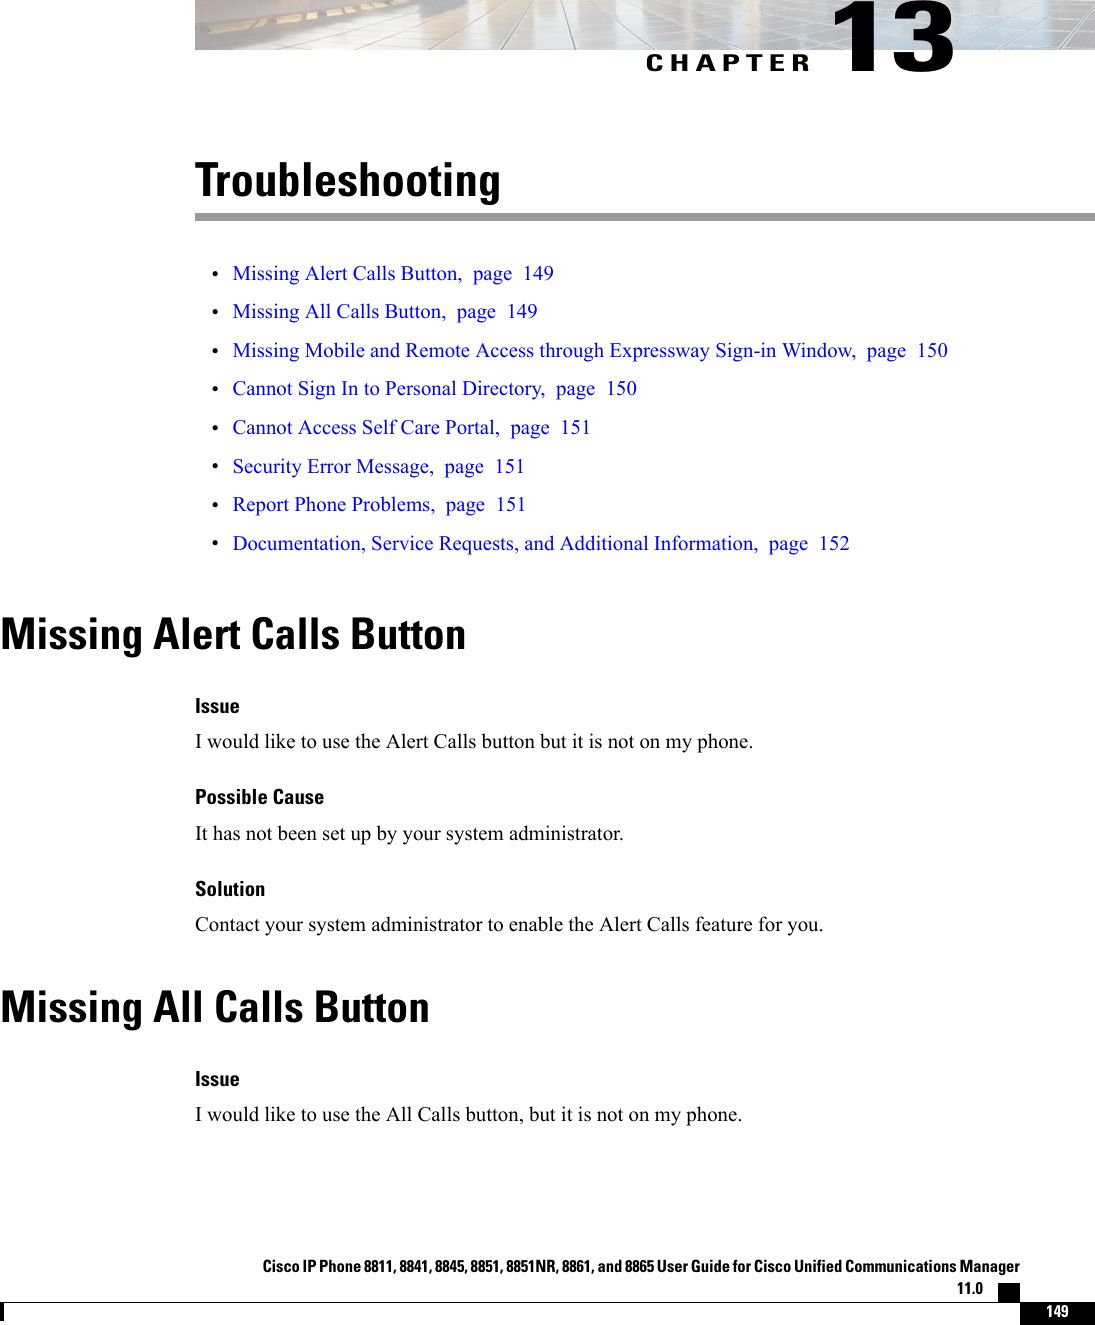 CHAPTER 13Troubleshooting•Missing Alert Calls Button, page 149•Missing All Calls Button, page 149•Missing Mobile and Remote Access through Expressway Sign-in Window, page 150•Cannot Sign In to Personal Directory, page 150•Cannot Access Self Care Portal, page 151•Security Error Message, page 151•Report Phone Problems, page 151•Documentation, Service Requests, and Additional Information, page 152Missing Alert Calls ButtonIssueI would like to use the Alert Calls button but it is not on my phone.Possible CauseIt has not been set up by your system administrator.SolutionContact your system administrator to enable the Alert Calls feature for you.Missing All Calls ButtonIssueI would like to use the All Calls button, but it is not on my phone.Cisco IP Phone 8811, 8841, 8845, 8851, 8851NR, 8861, and 8865 User Guide for Cisco Unified Communications Manager11.0    149